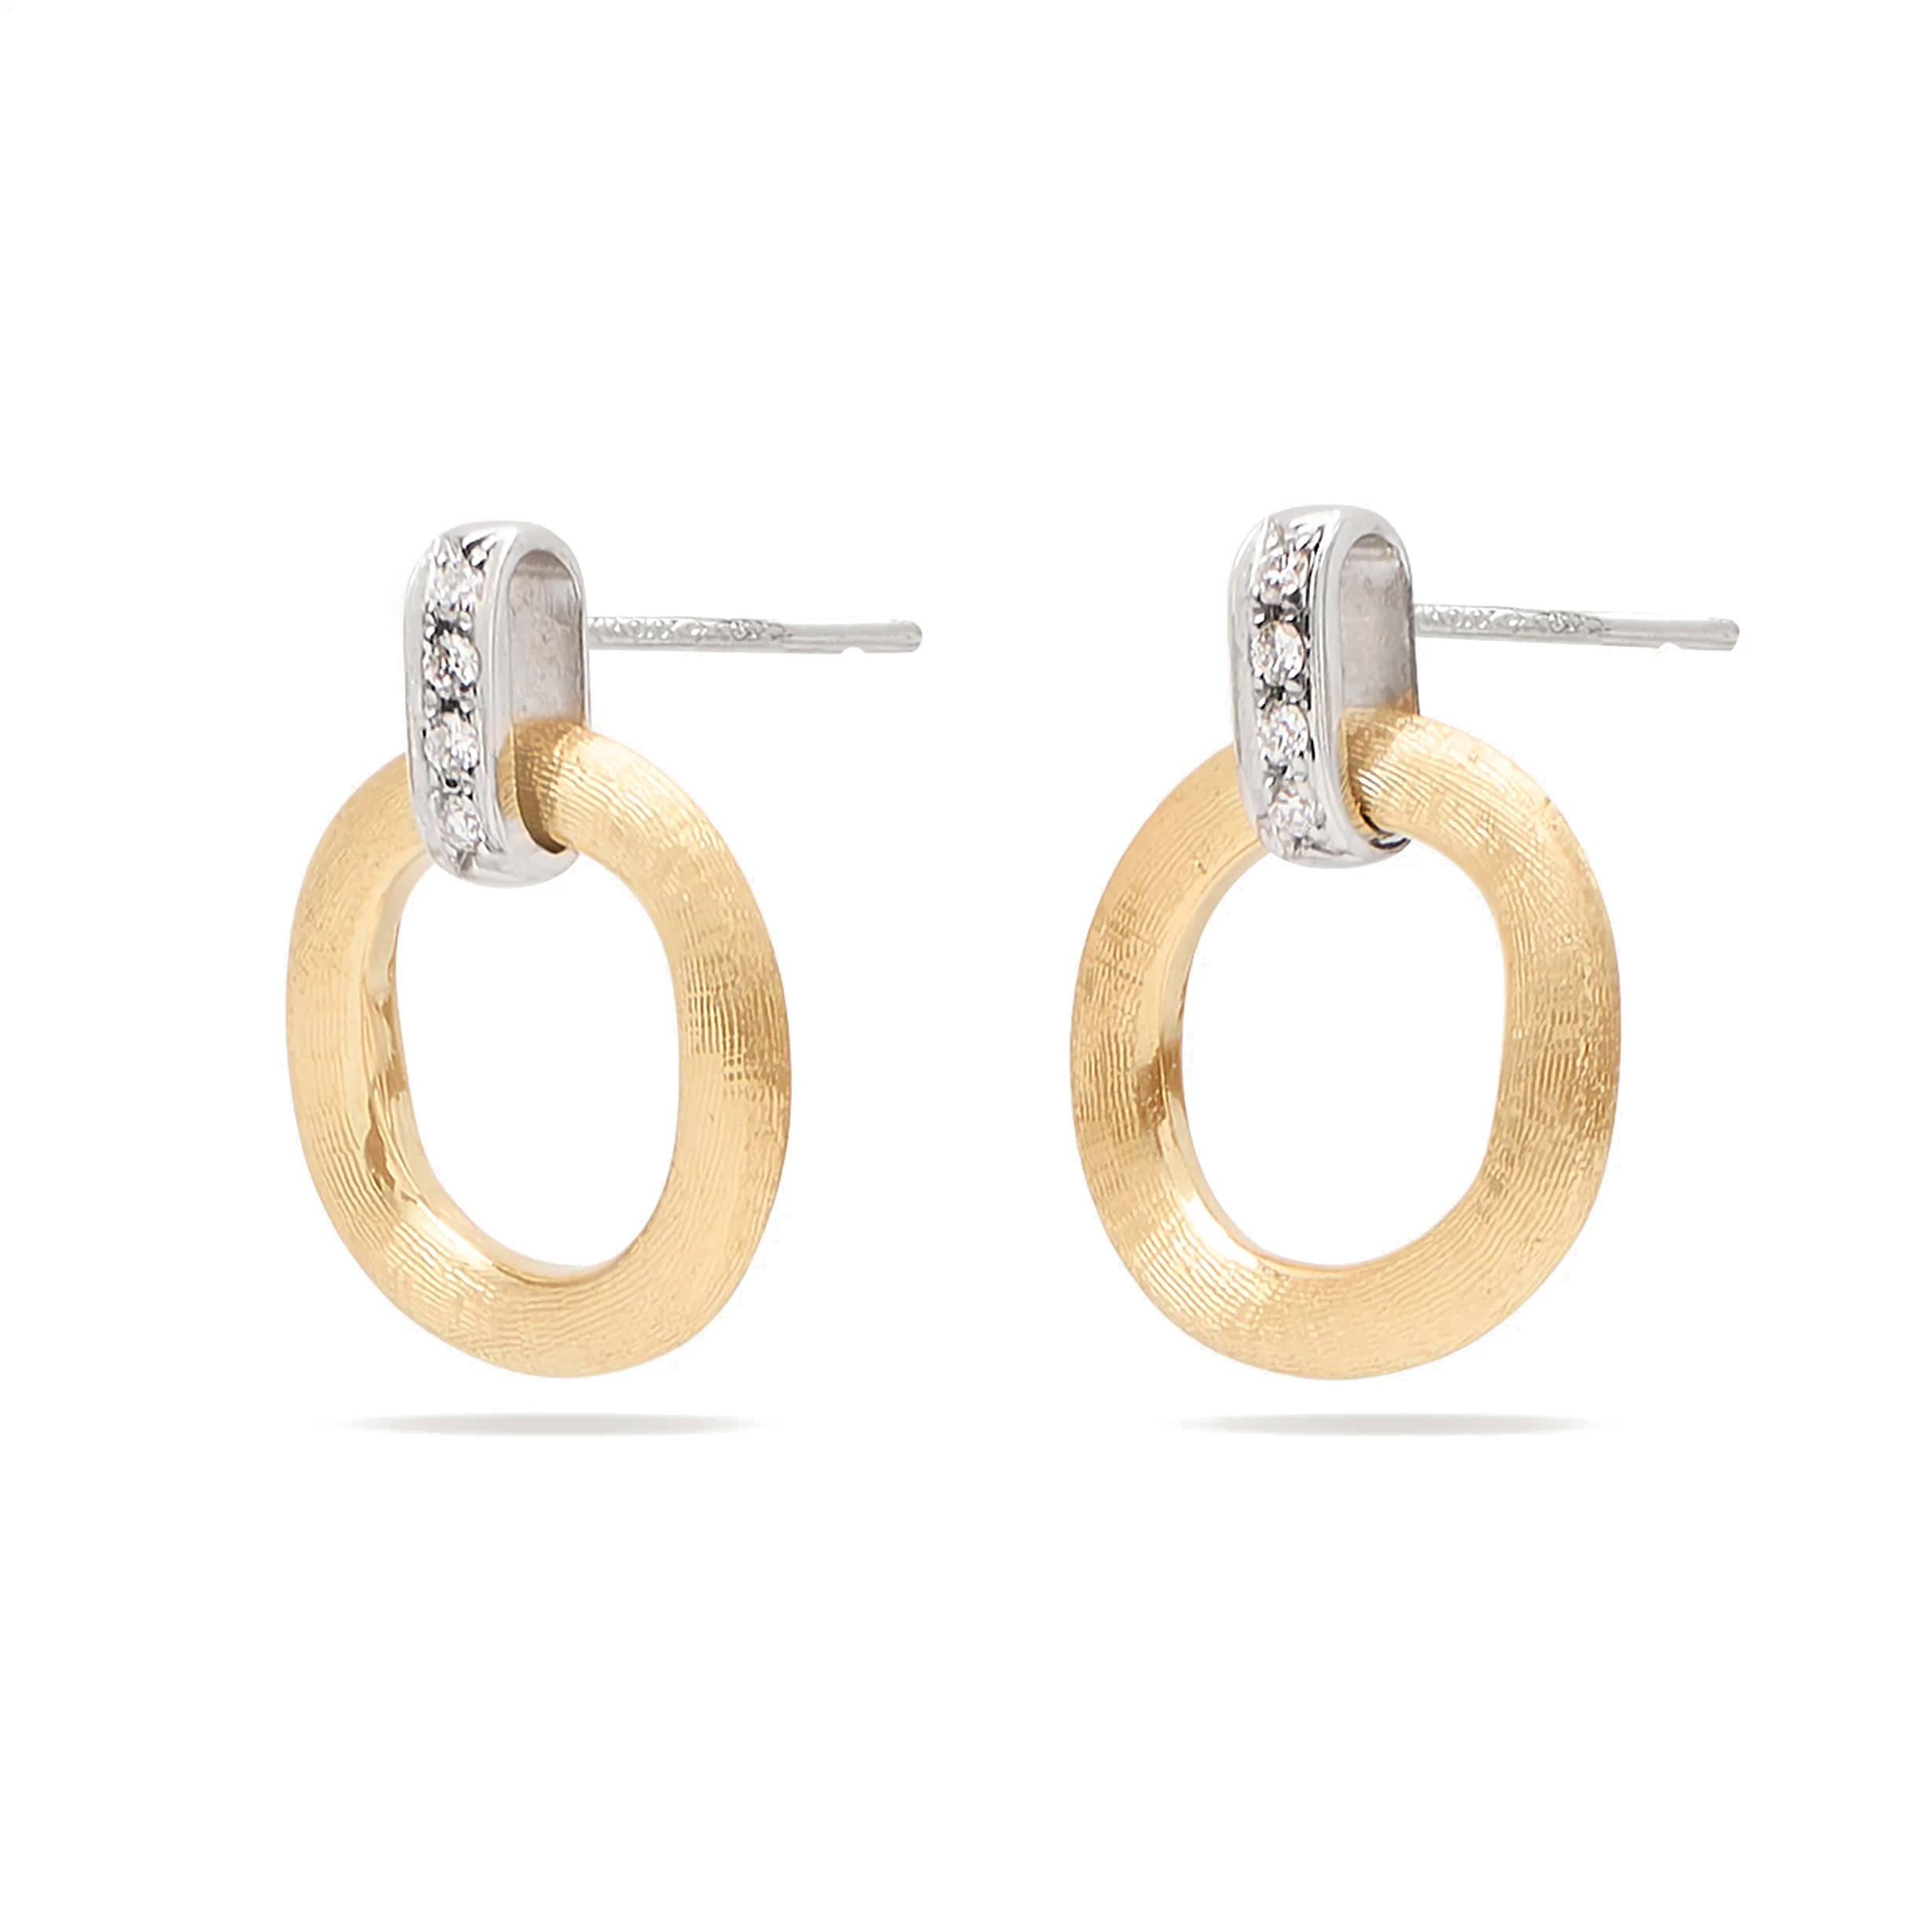 Marco Bicego Jaipur Gold Stud Drop Earrings with Diamonds 2